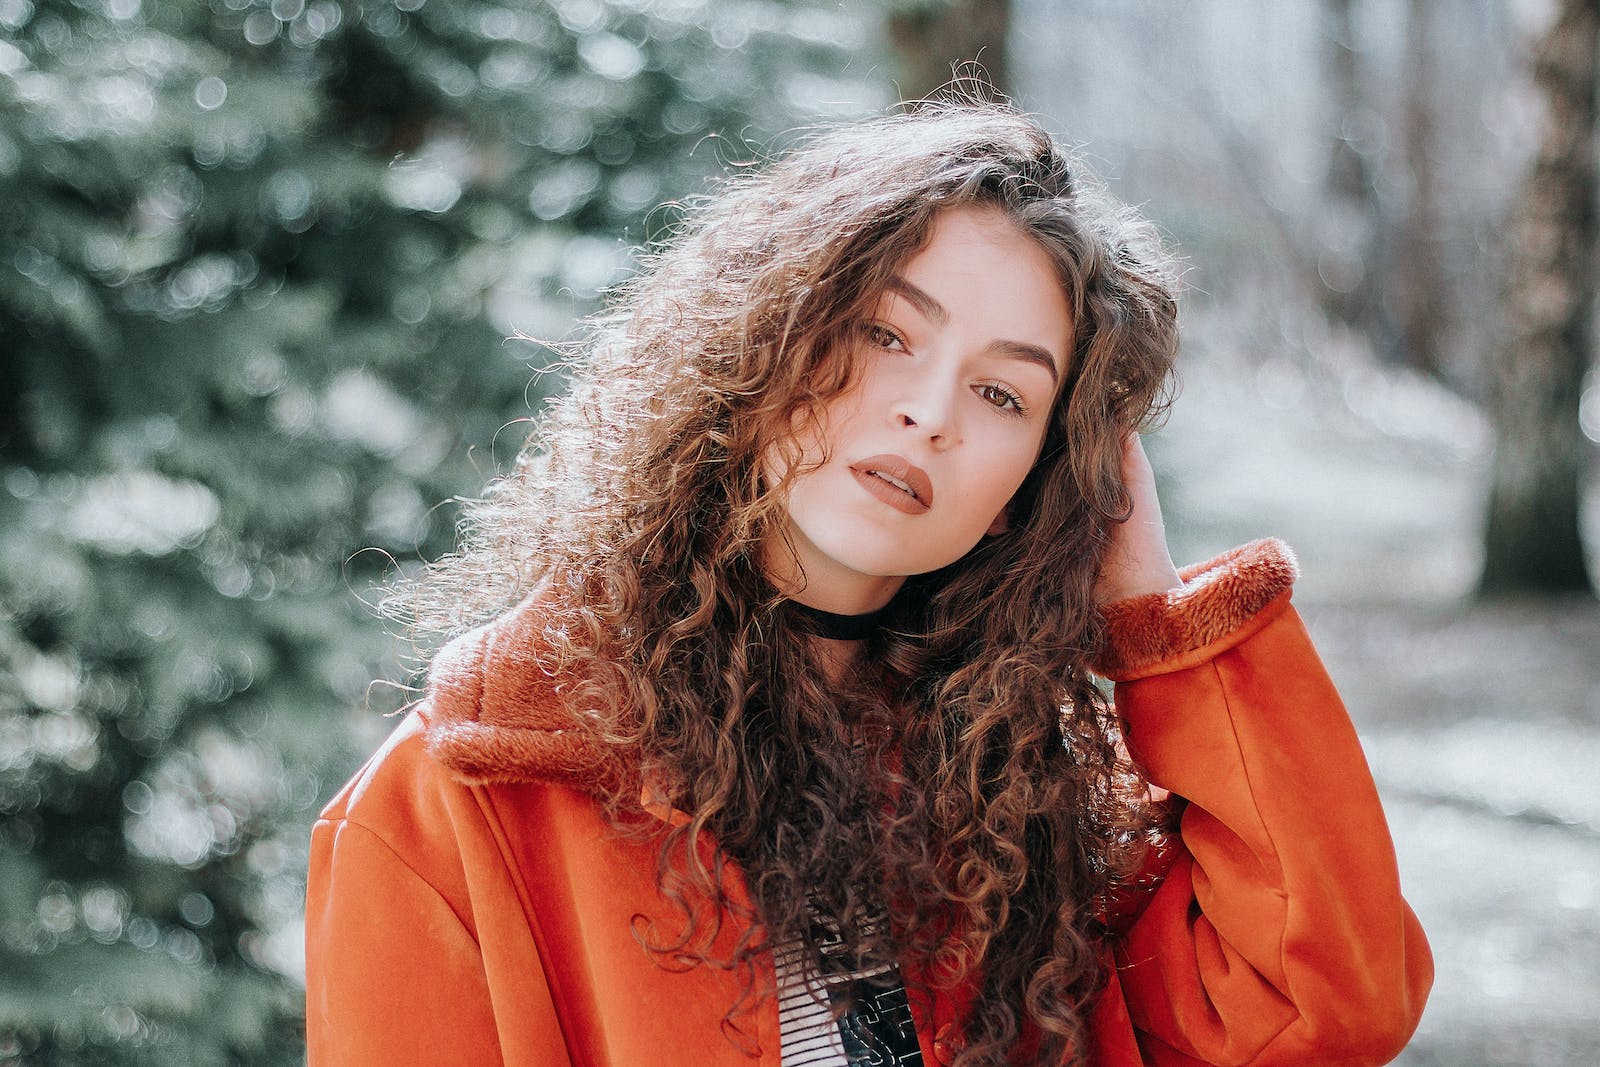 Woman in Orange Zip-up Jacket with Curly Hair